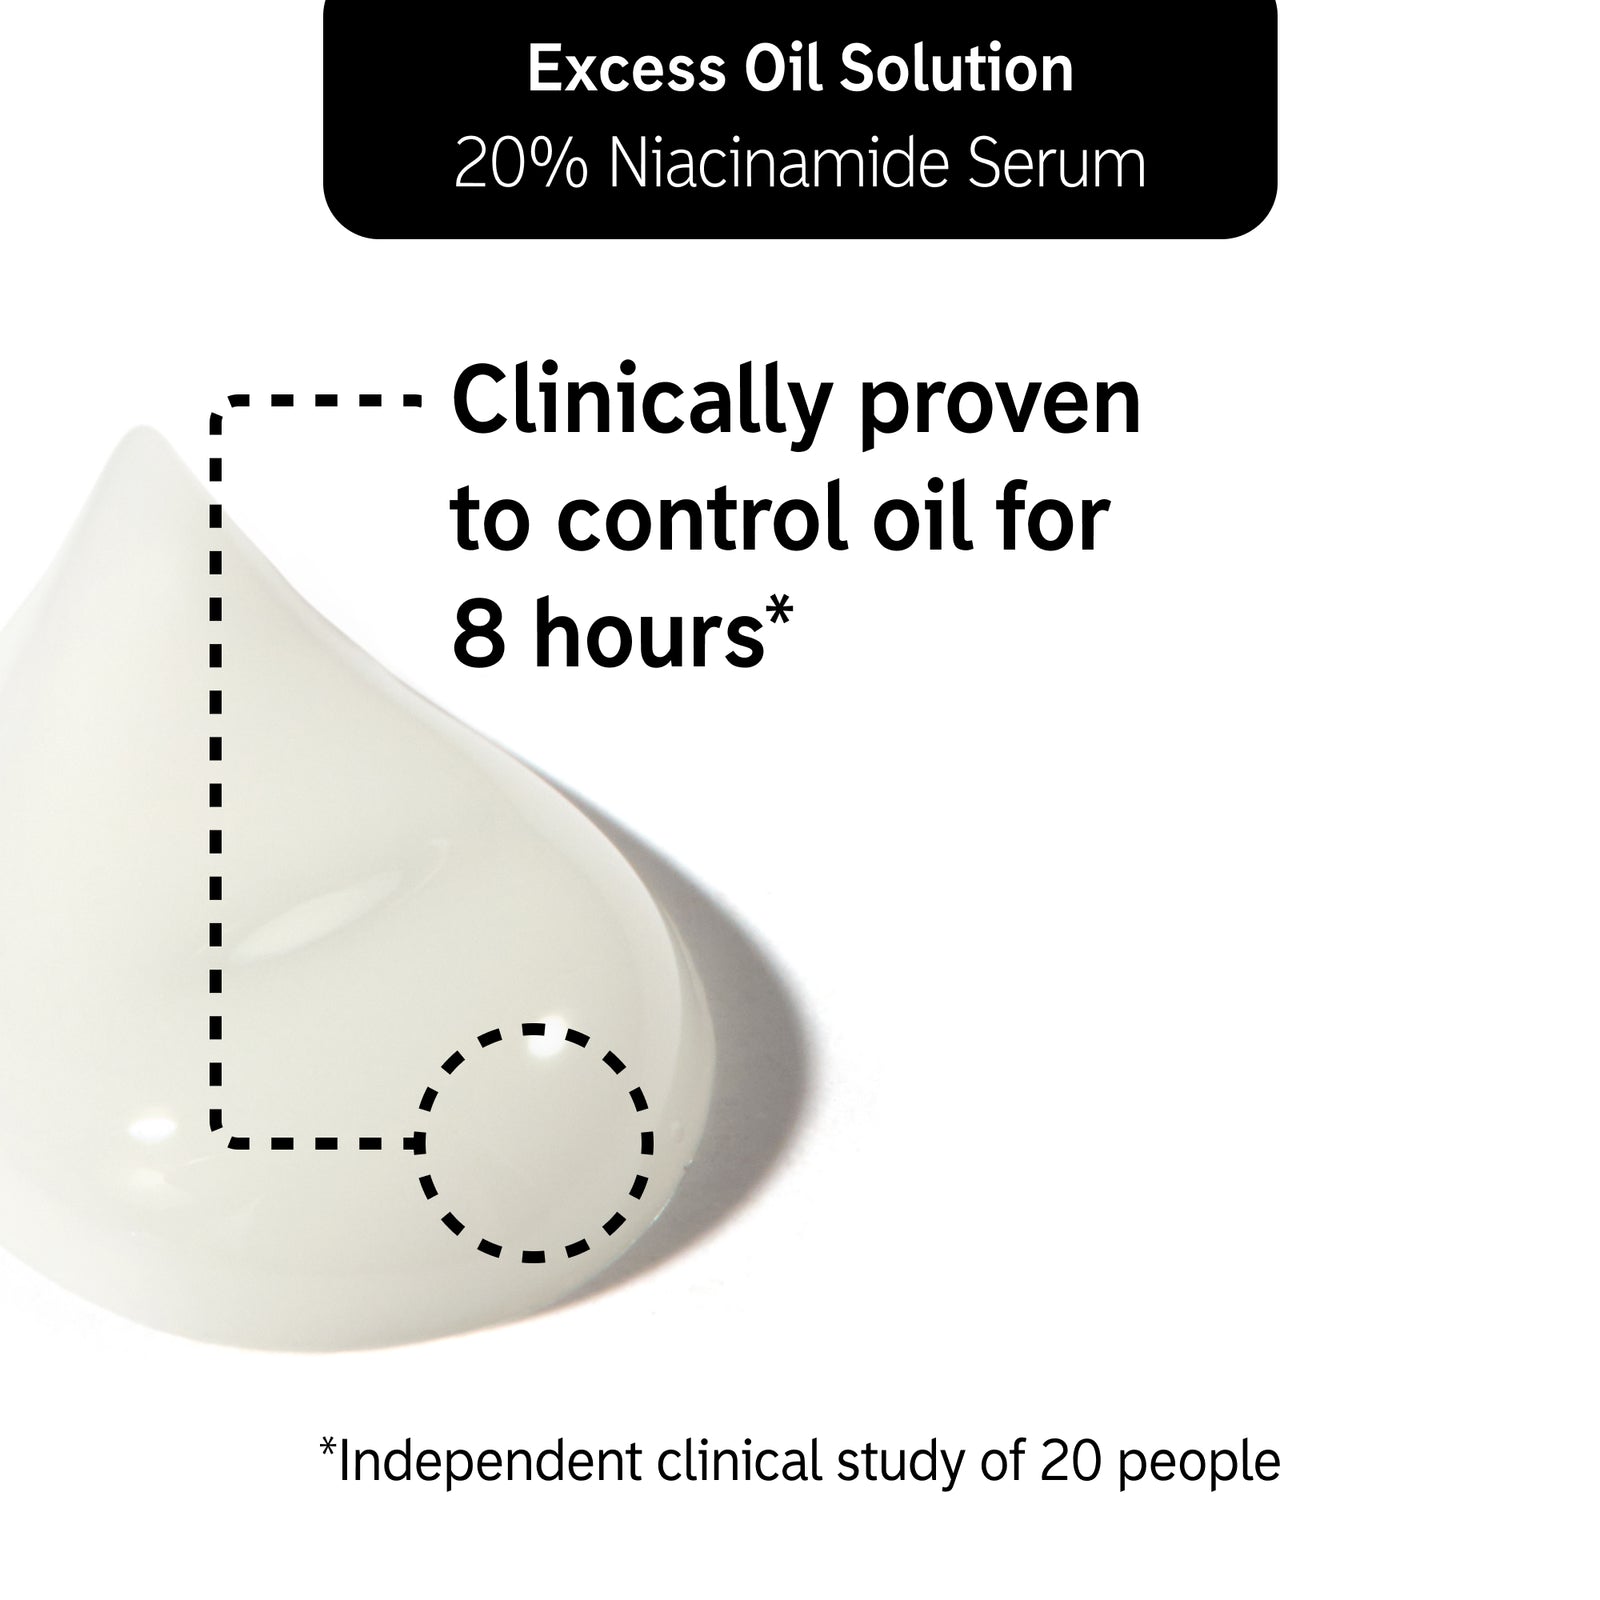 Key claim from clinical study of using 20% Niacinamide serum